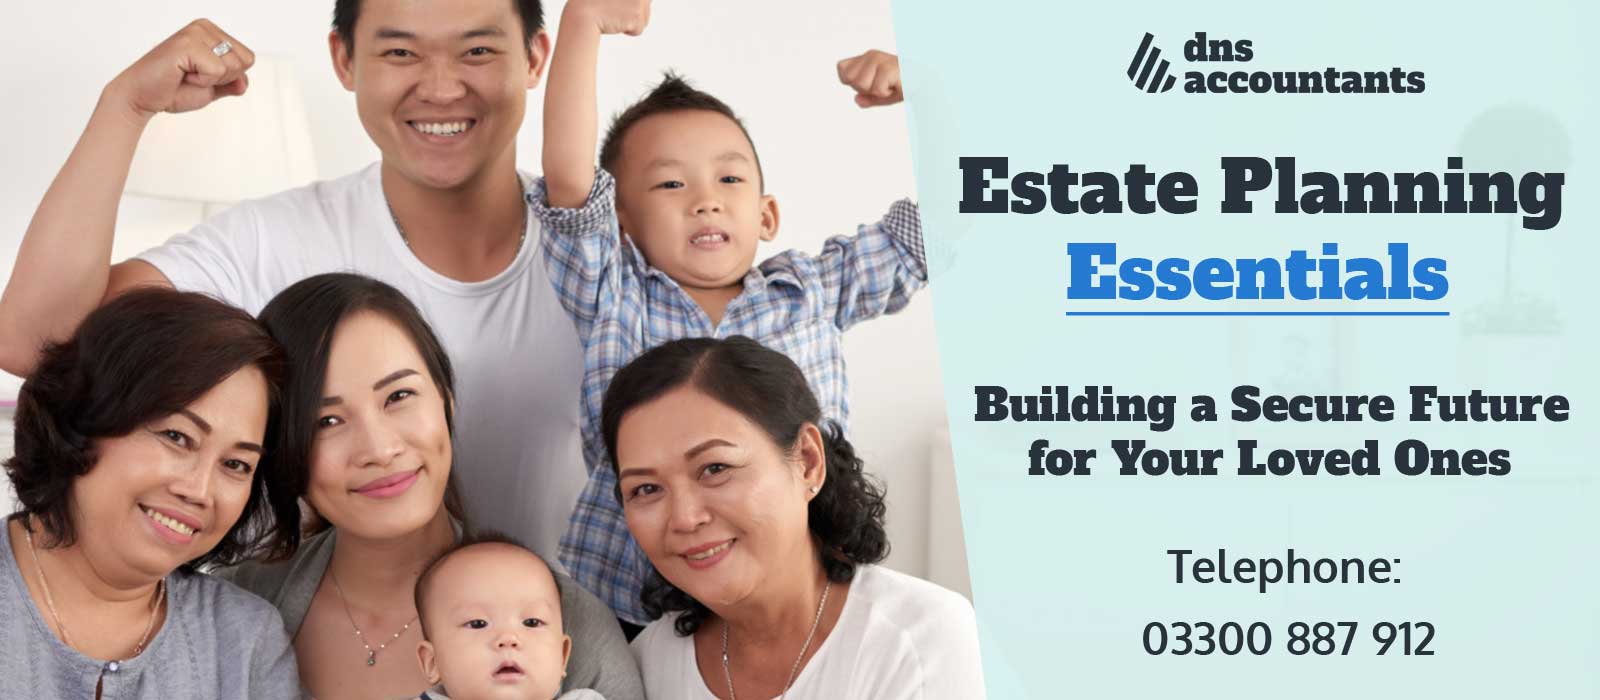 Estate Planning Essentials: Building a Secure Future for Your Loved Ones